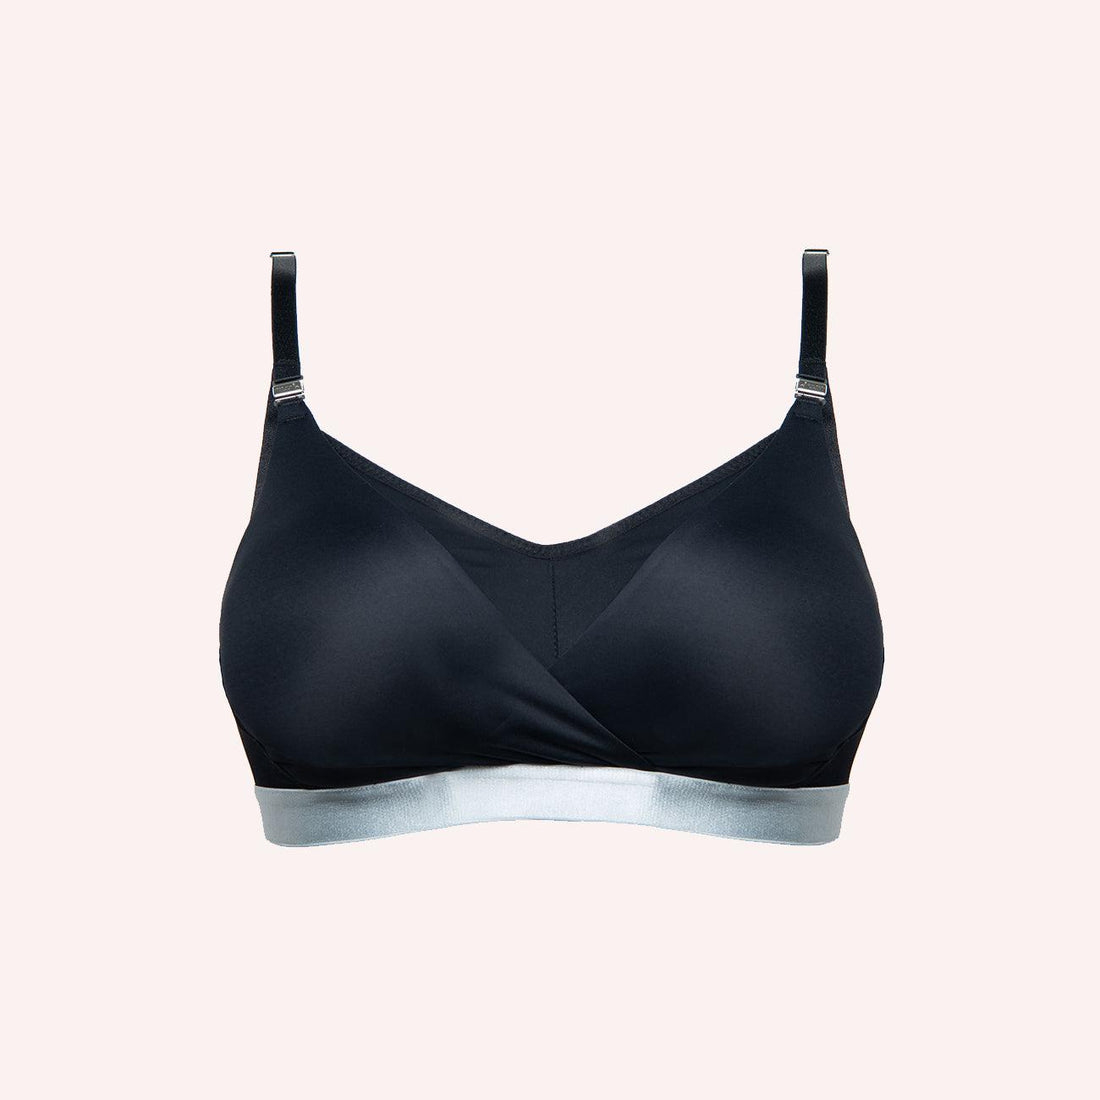 How to choose a maternity bra – The Memo